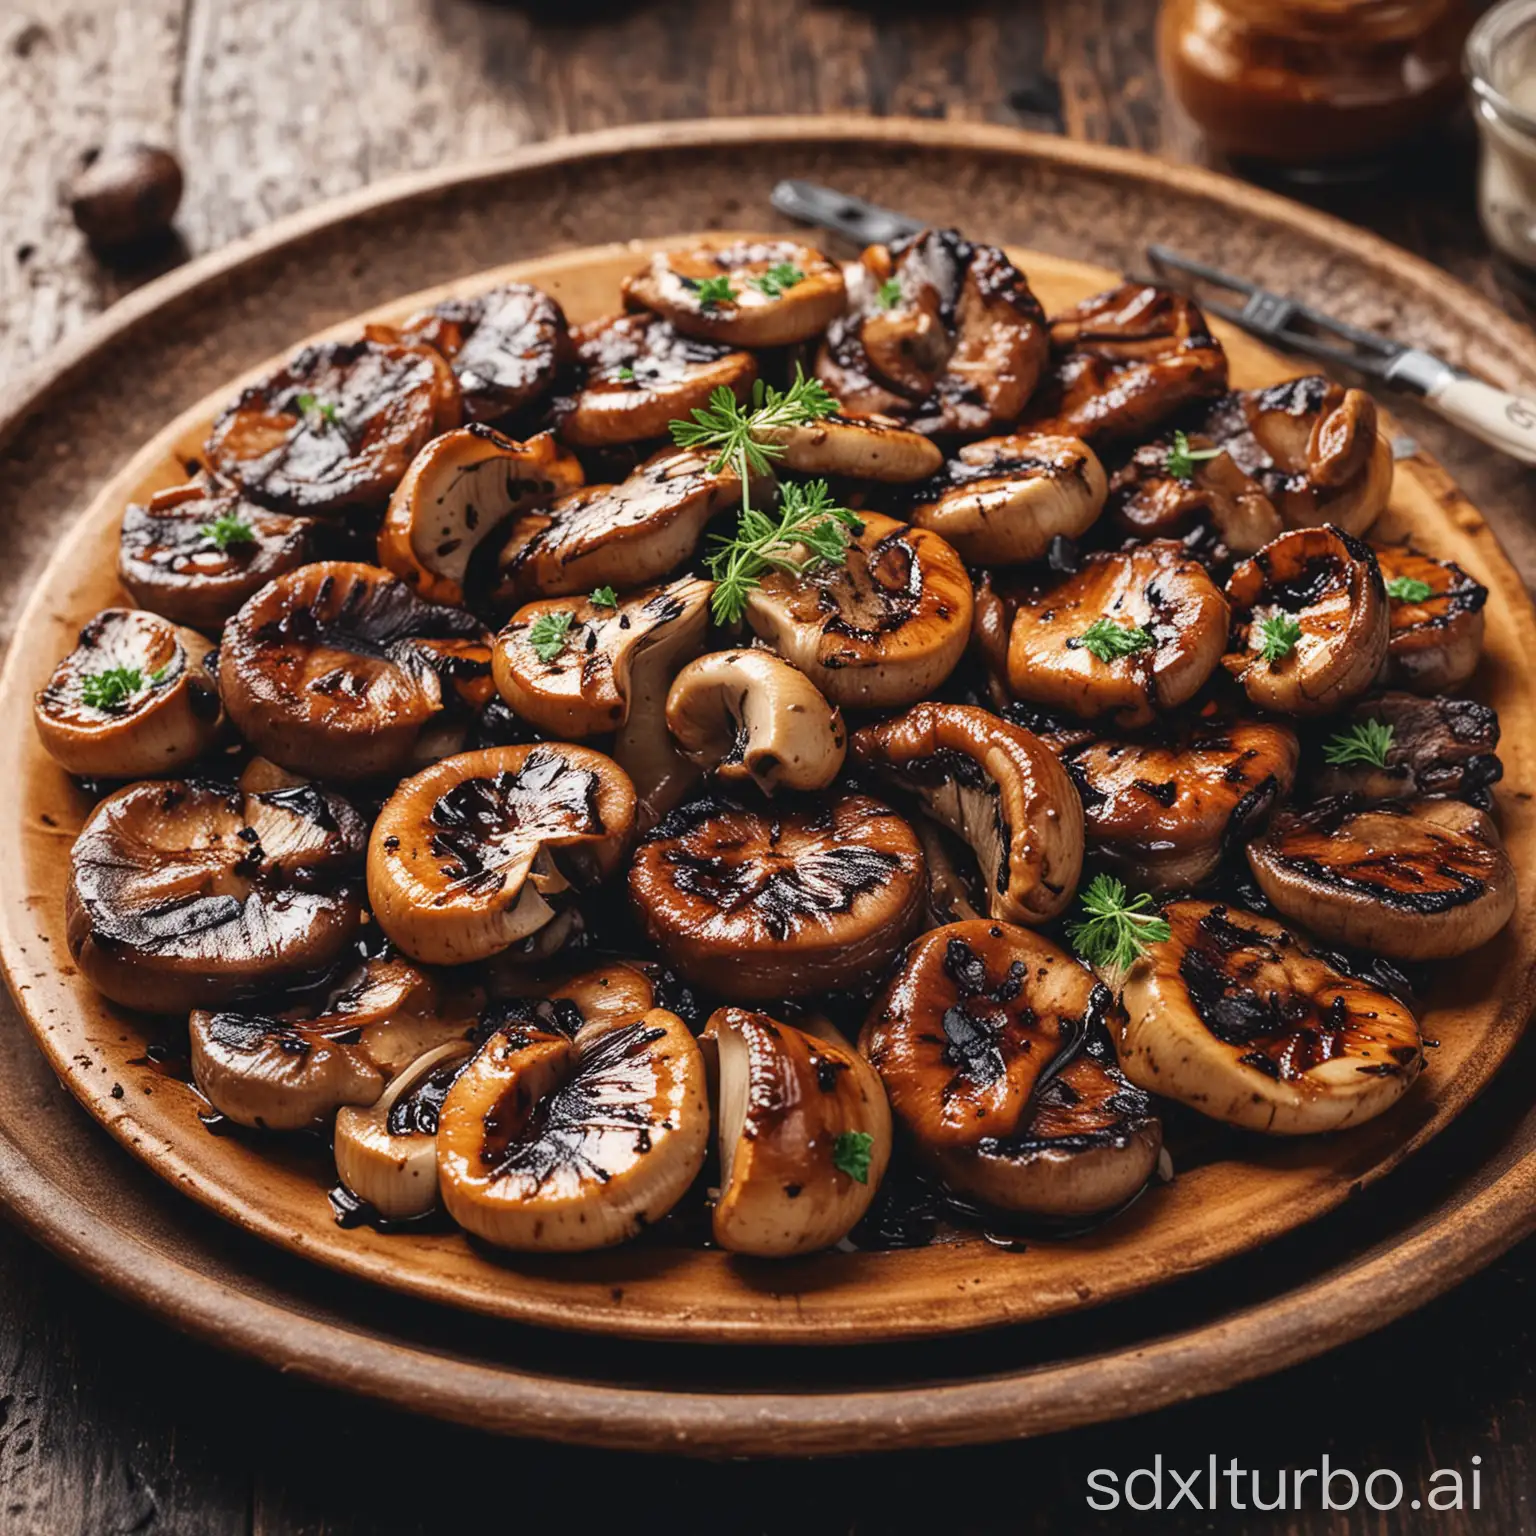 A plate of grilled mushroom, BBQ, mouthwatering and enticing presentation, Very real colors and comfortable light. Looks like it's in a fancy restaurant